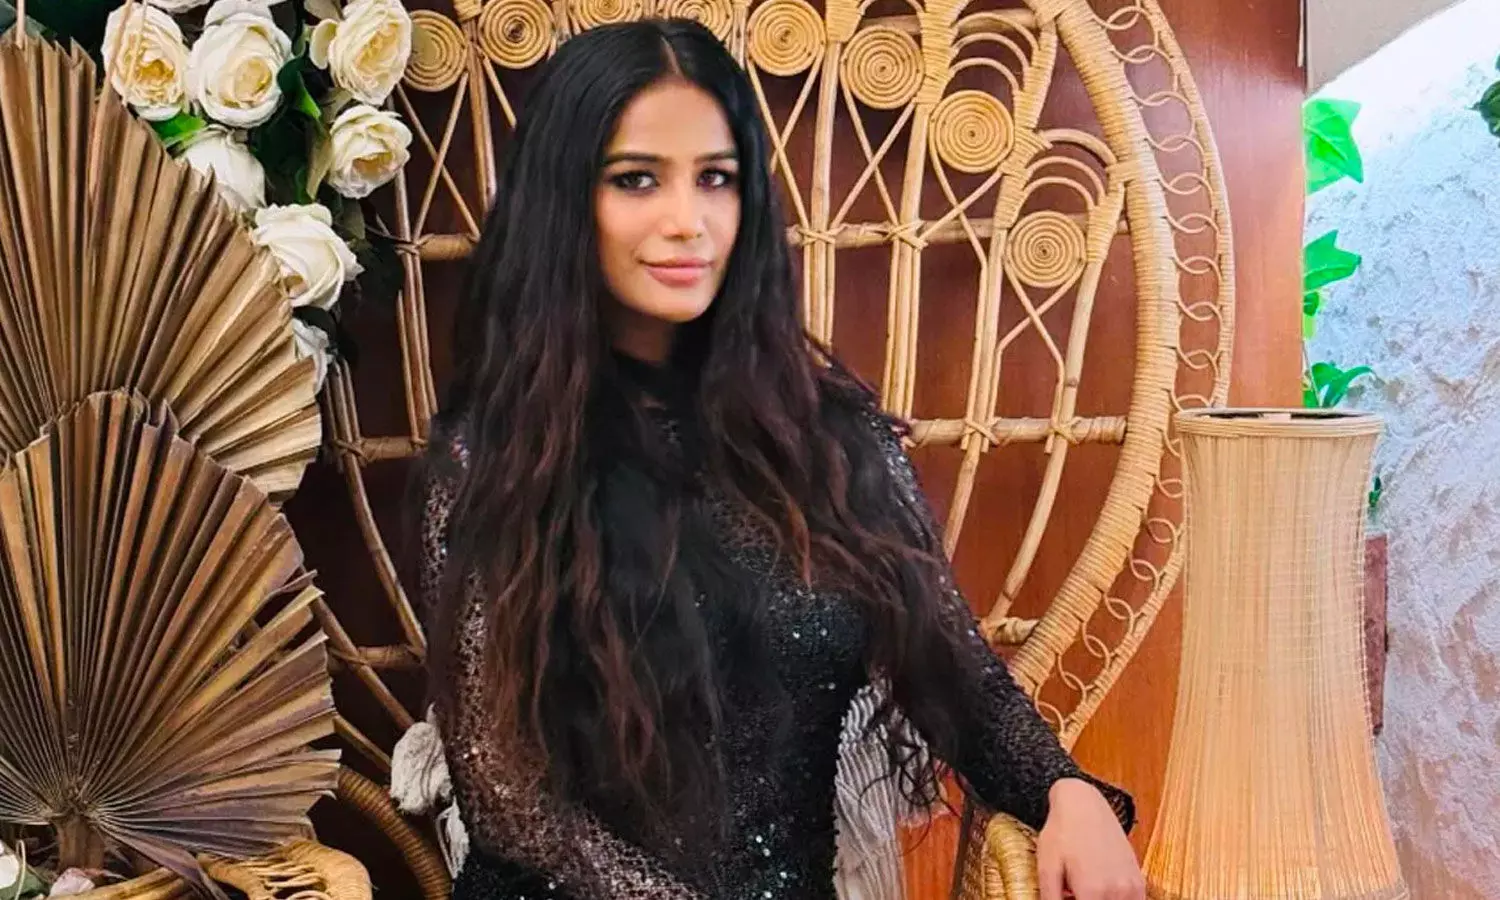 Union Health Ministry Drops Poonam Pandey from Cervical Cancer Awareness Campaign After Fake Death Stunt